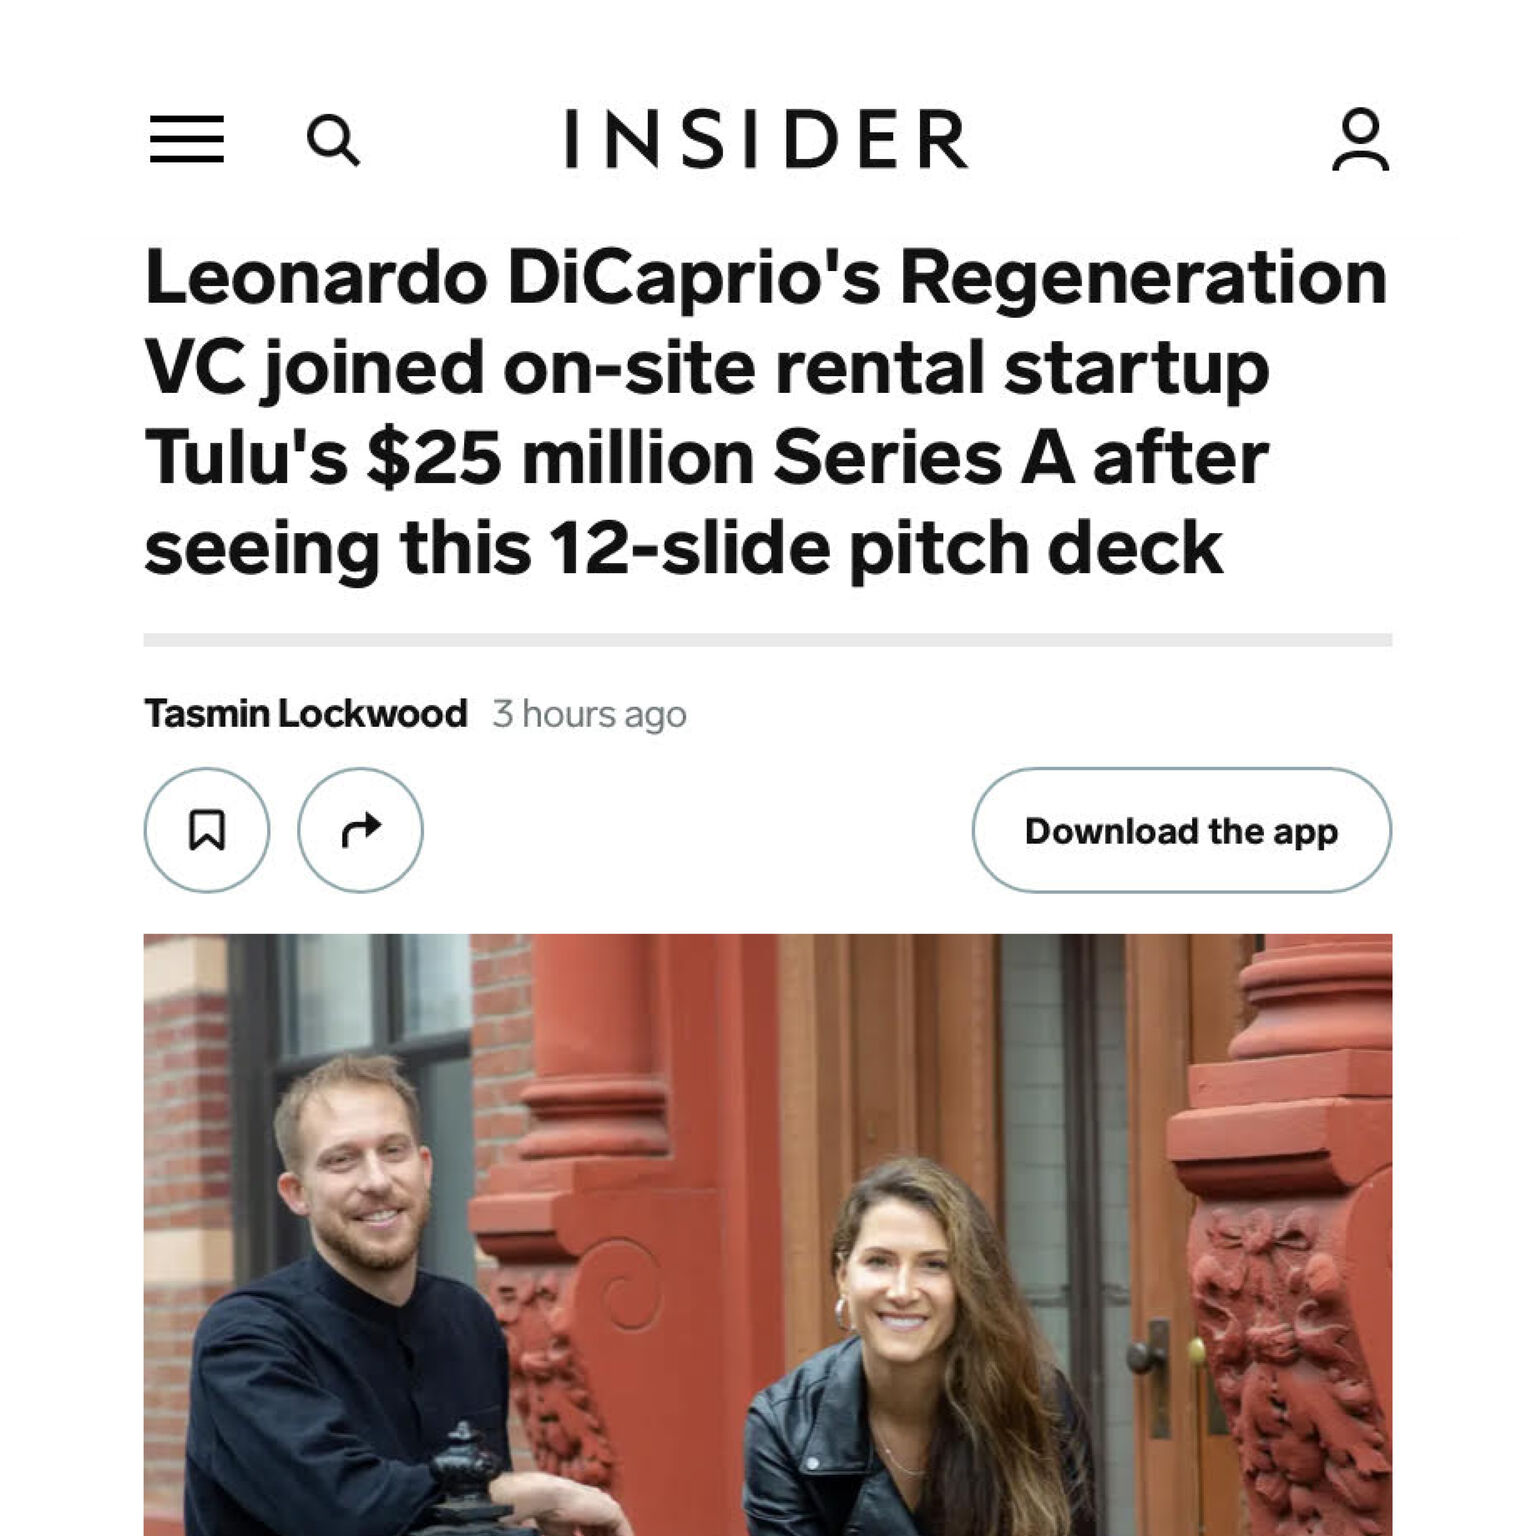 Leonardo DiCaprio’s Regenration VC joined on-site rental startup Tulu’s $25 million Series A after seeing this 12-slide pitch deck